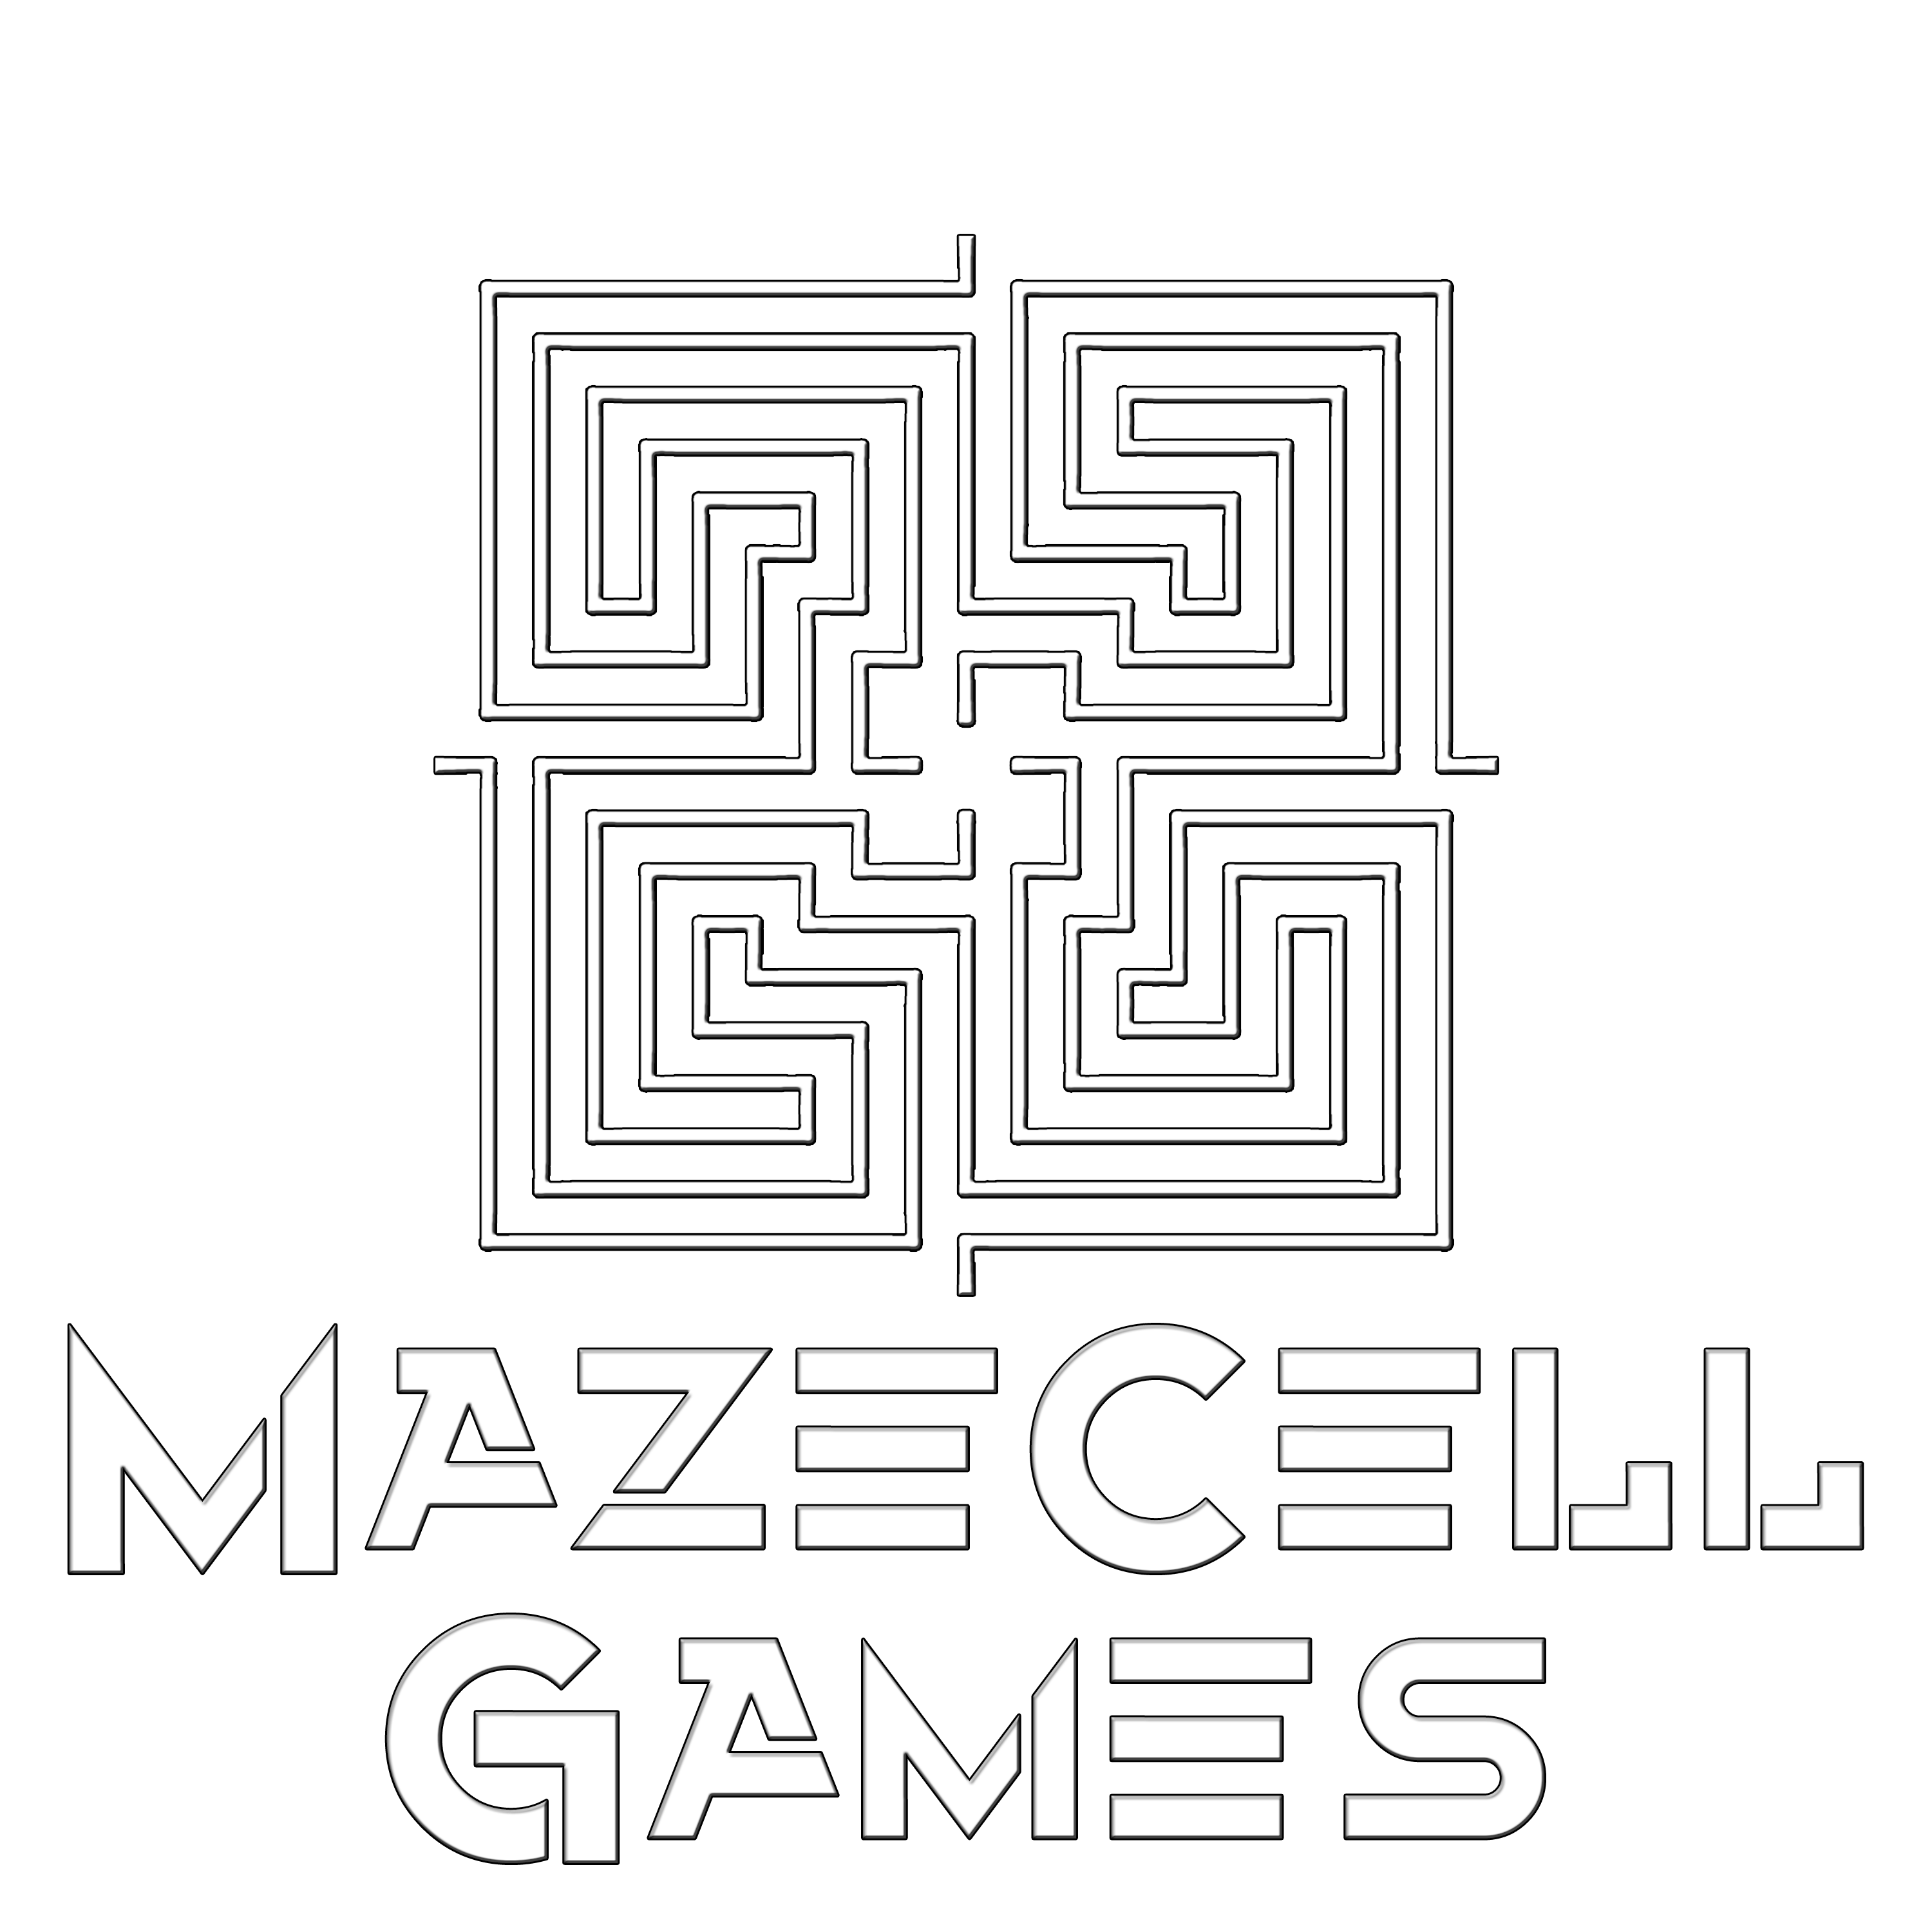 Mazecell Games